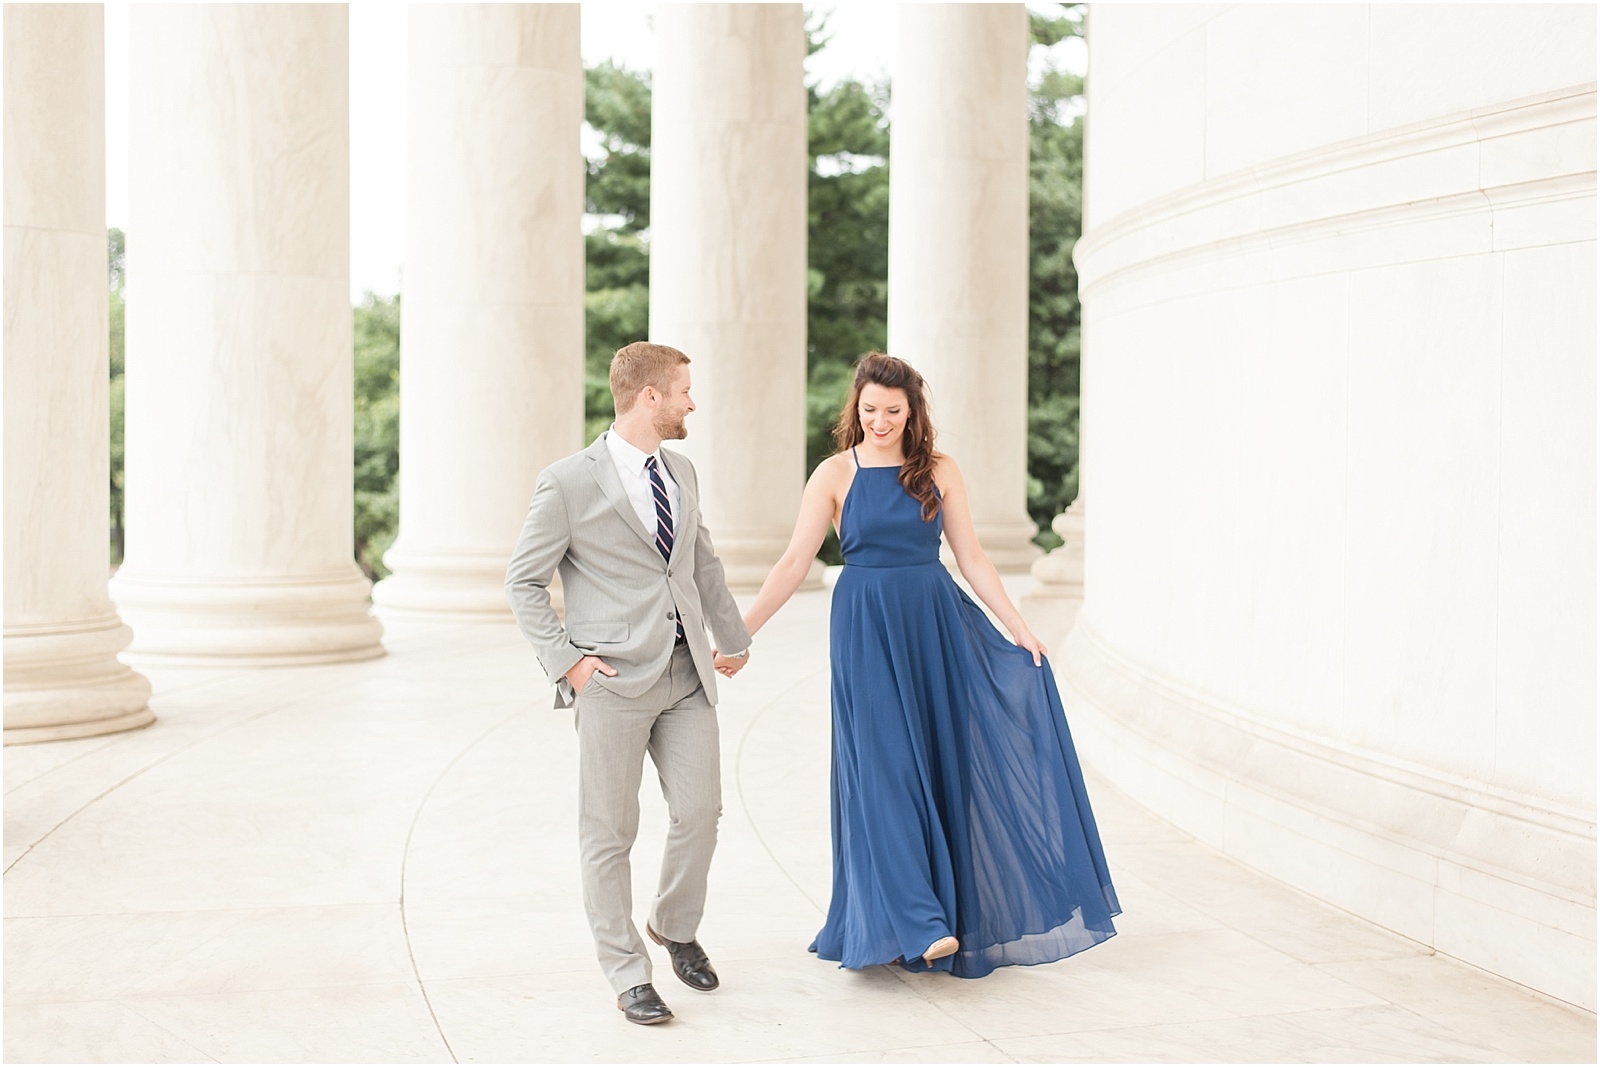 0024 Bret and Brandie Photography| Washington DC Engagement | Megan and Connor.jpg